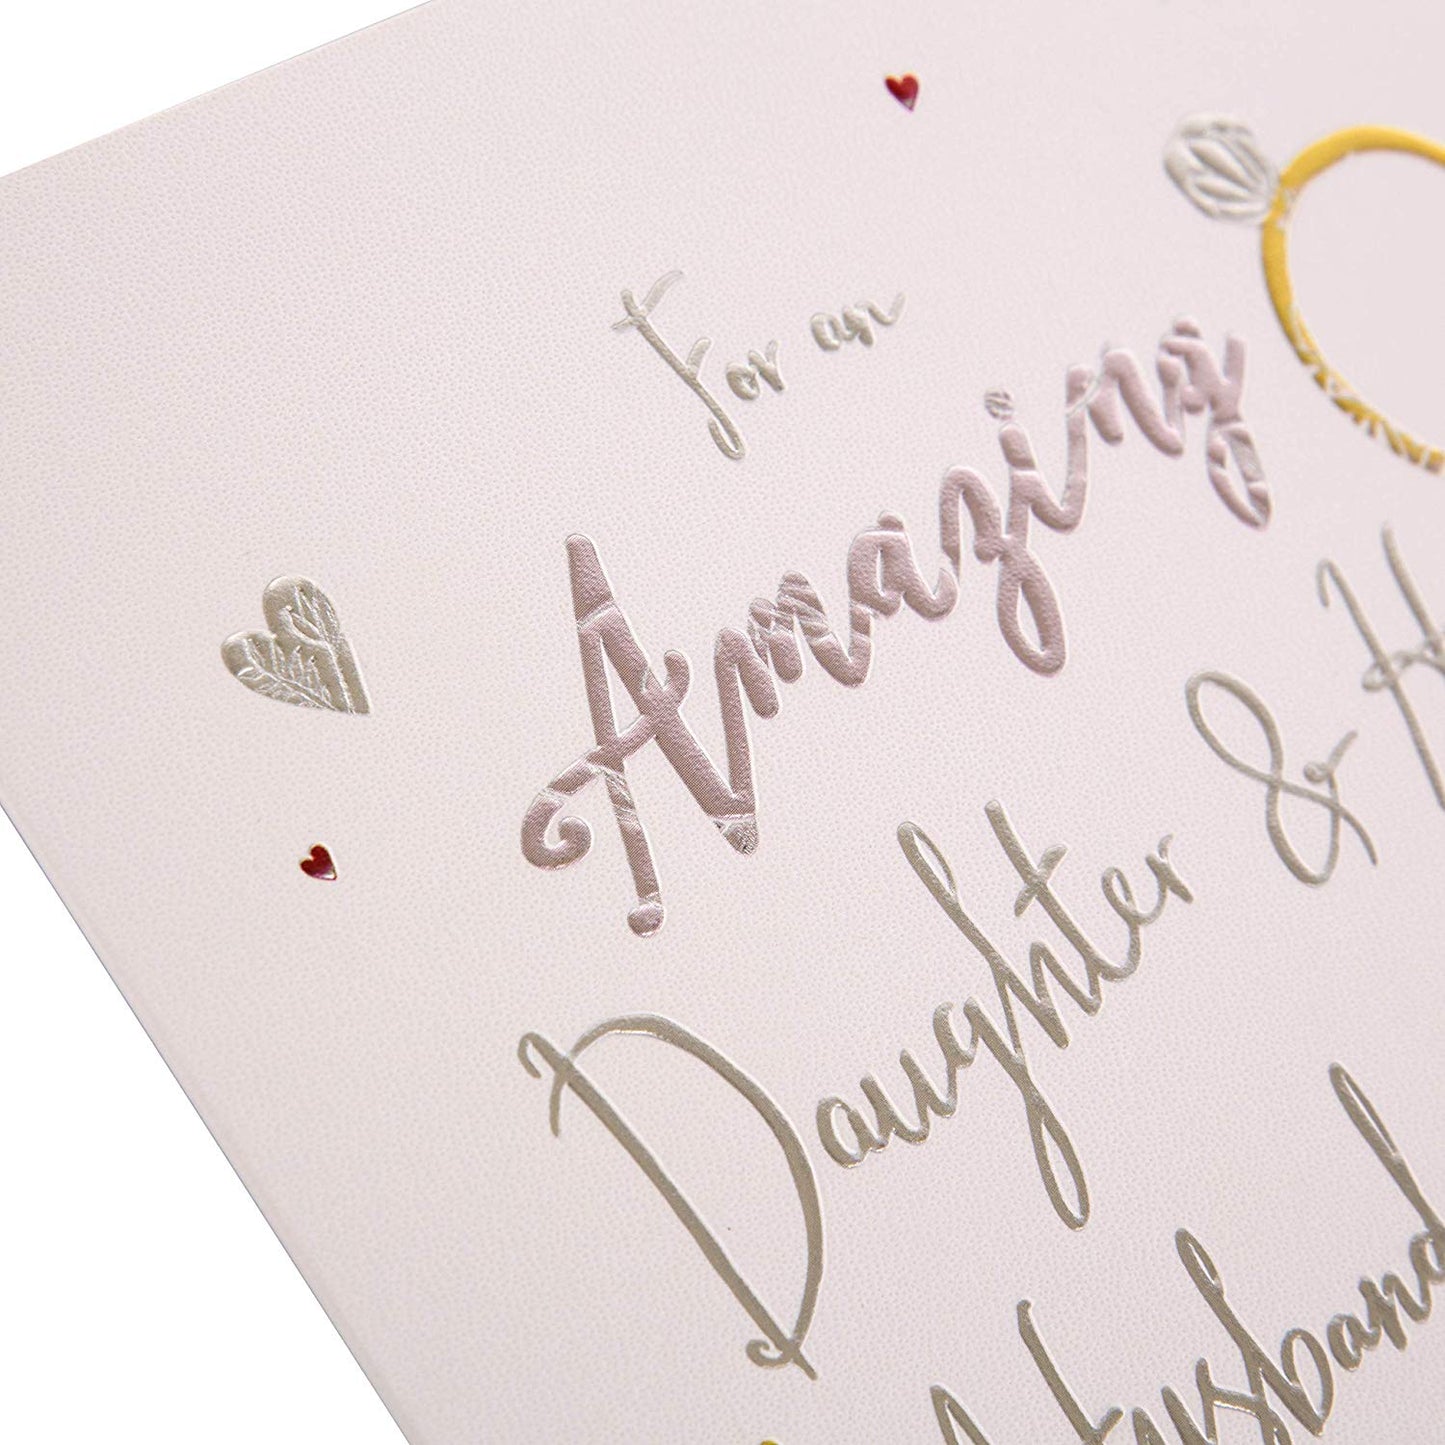 Daughter and Future Husband Engagement Card 'Congratulations'